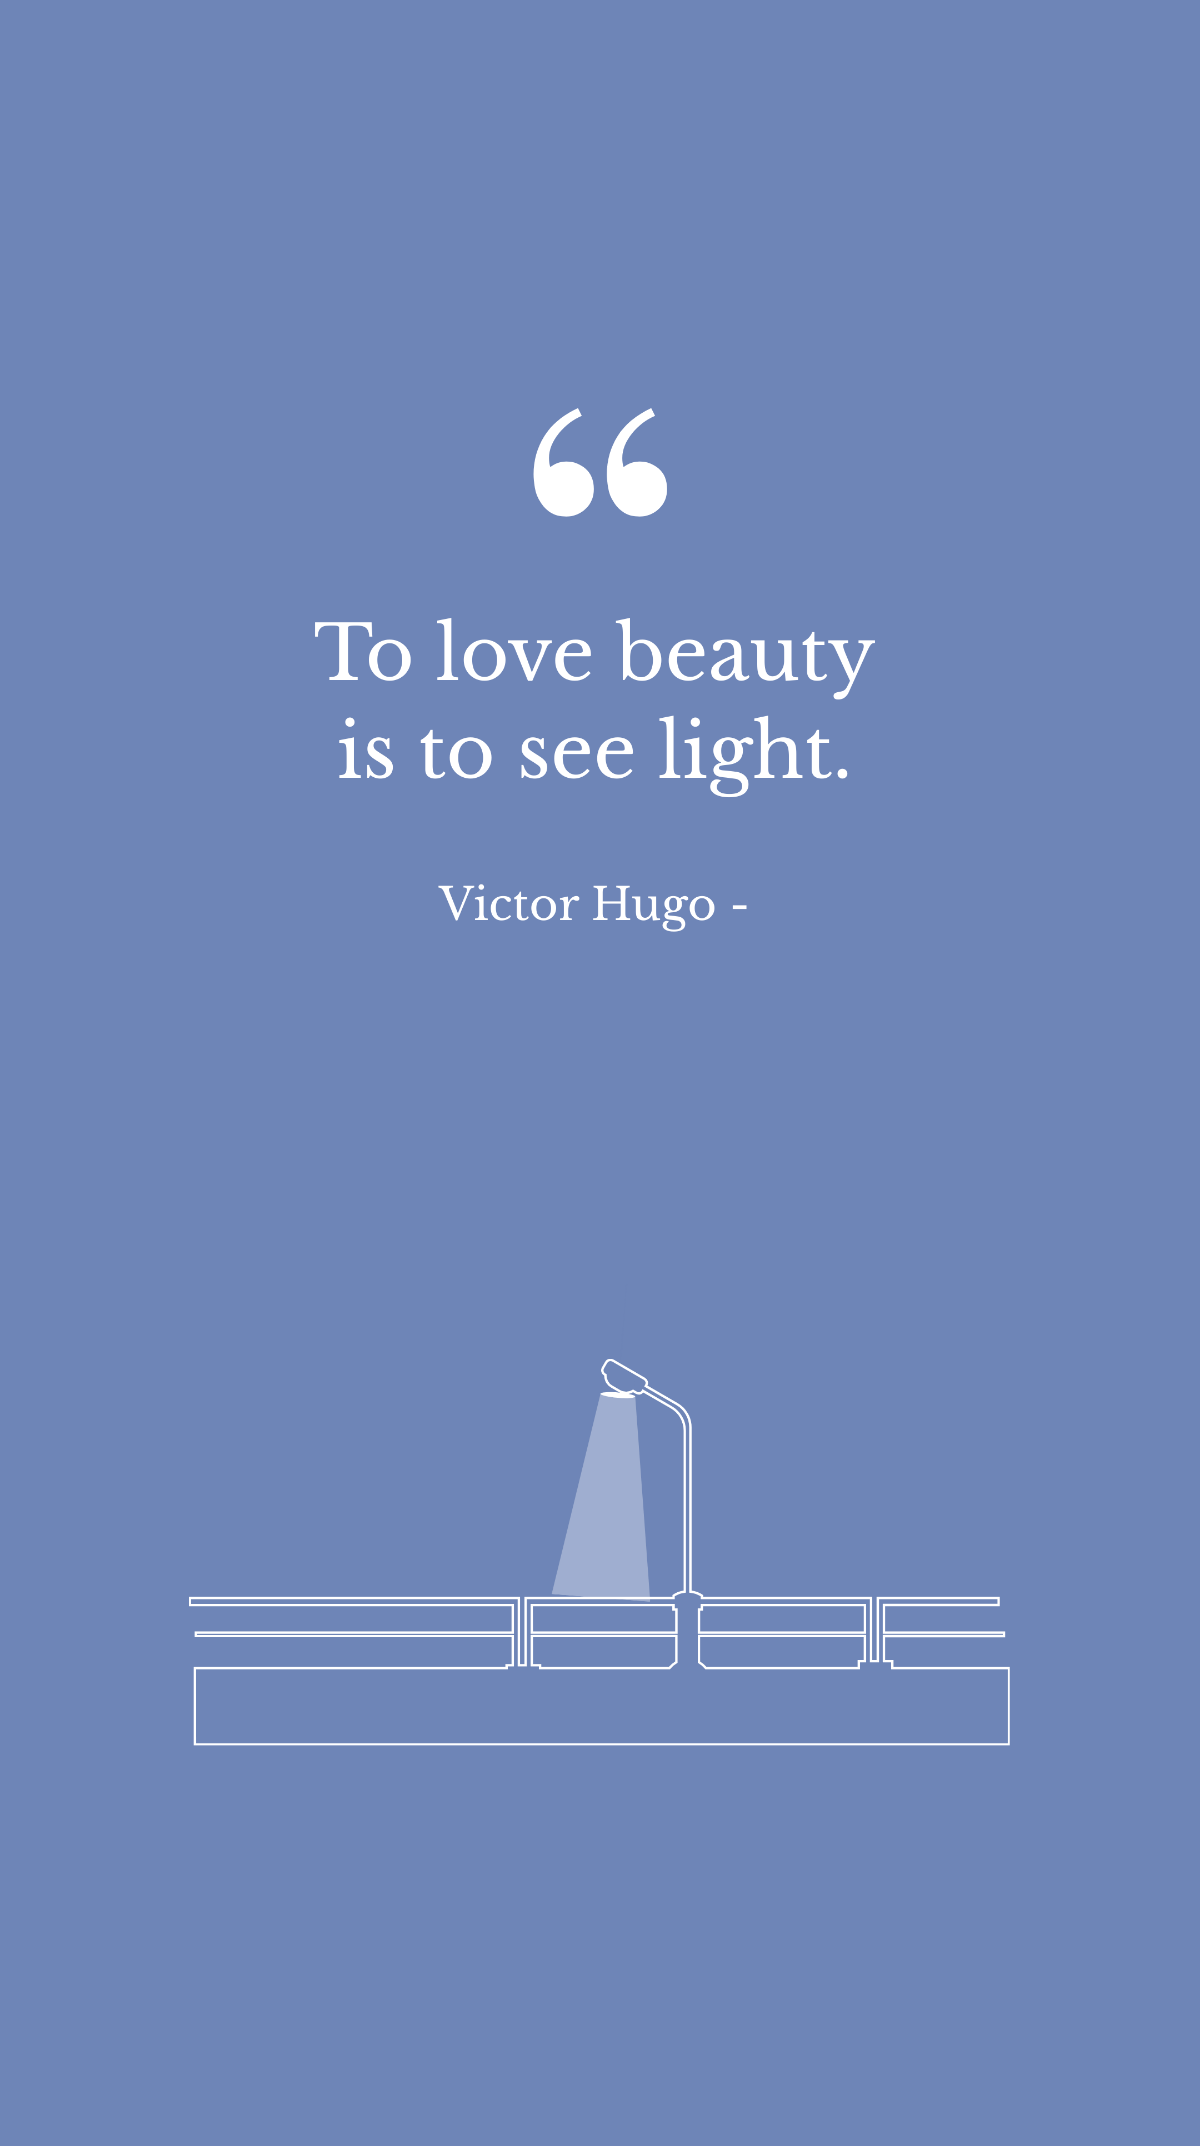 Victor Hugo - To love beauty is to see light. Template